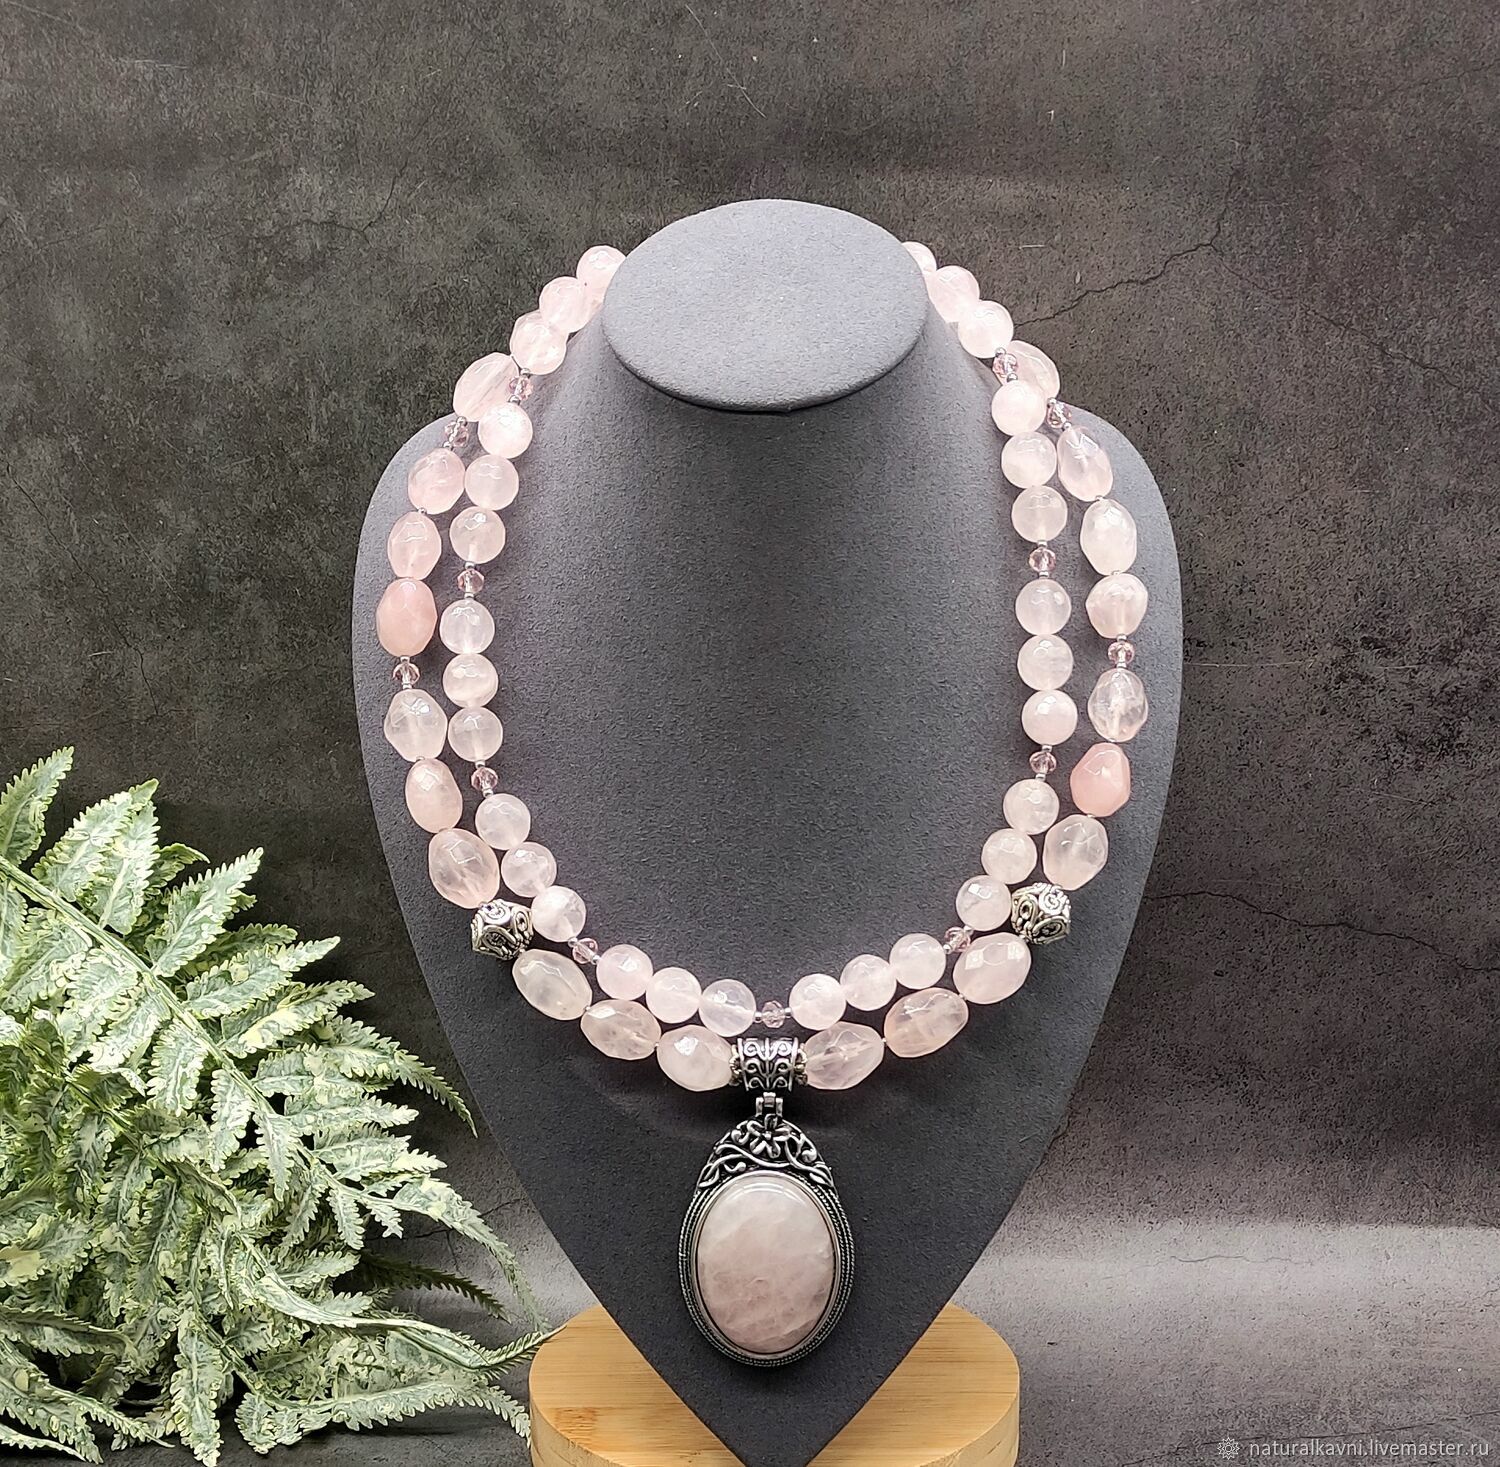 Natural rose quartz with a pendant Author's necklace, Necklace, Moscow,  Фото №1